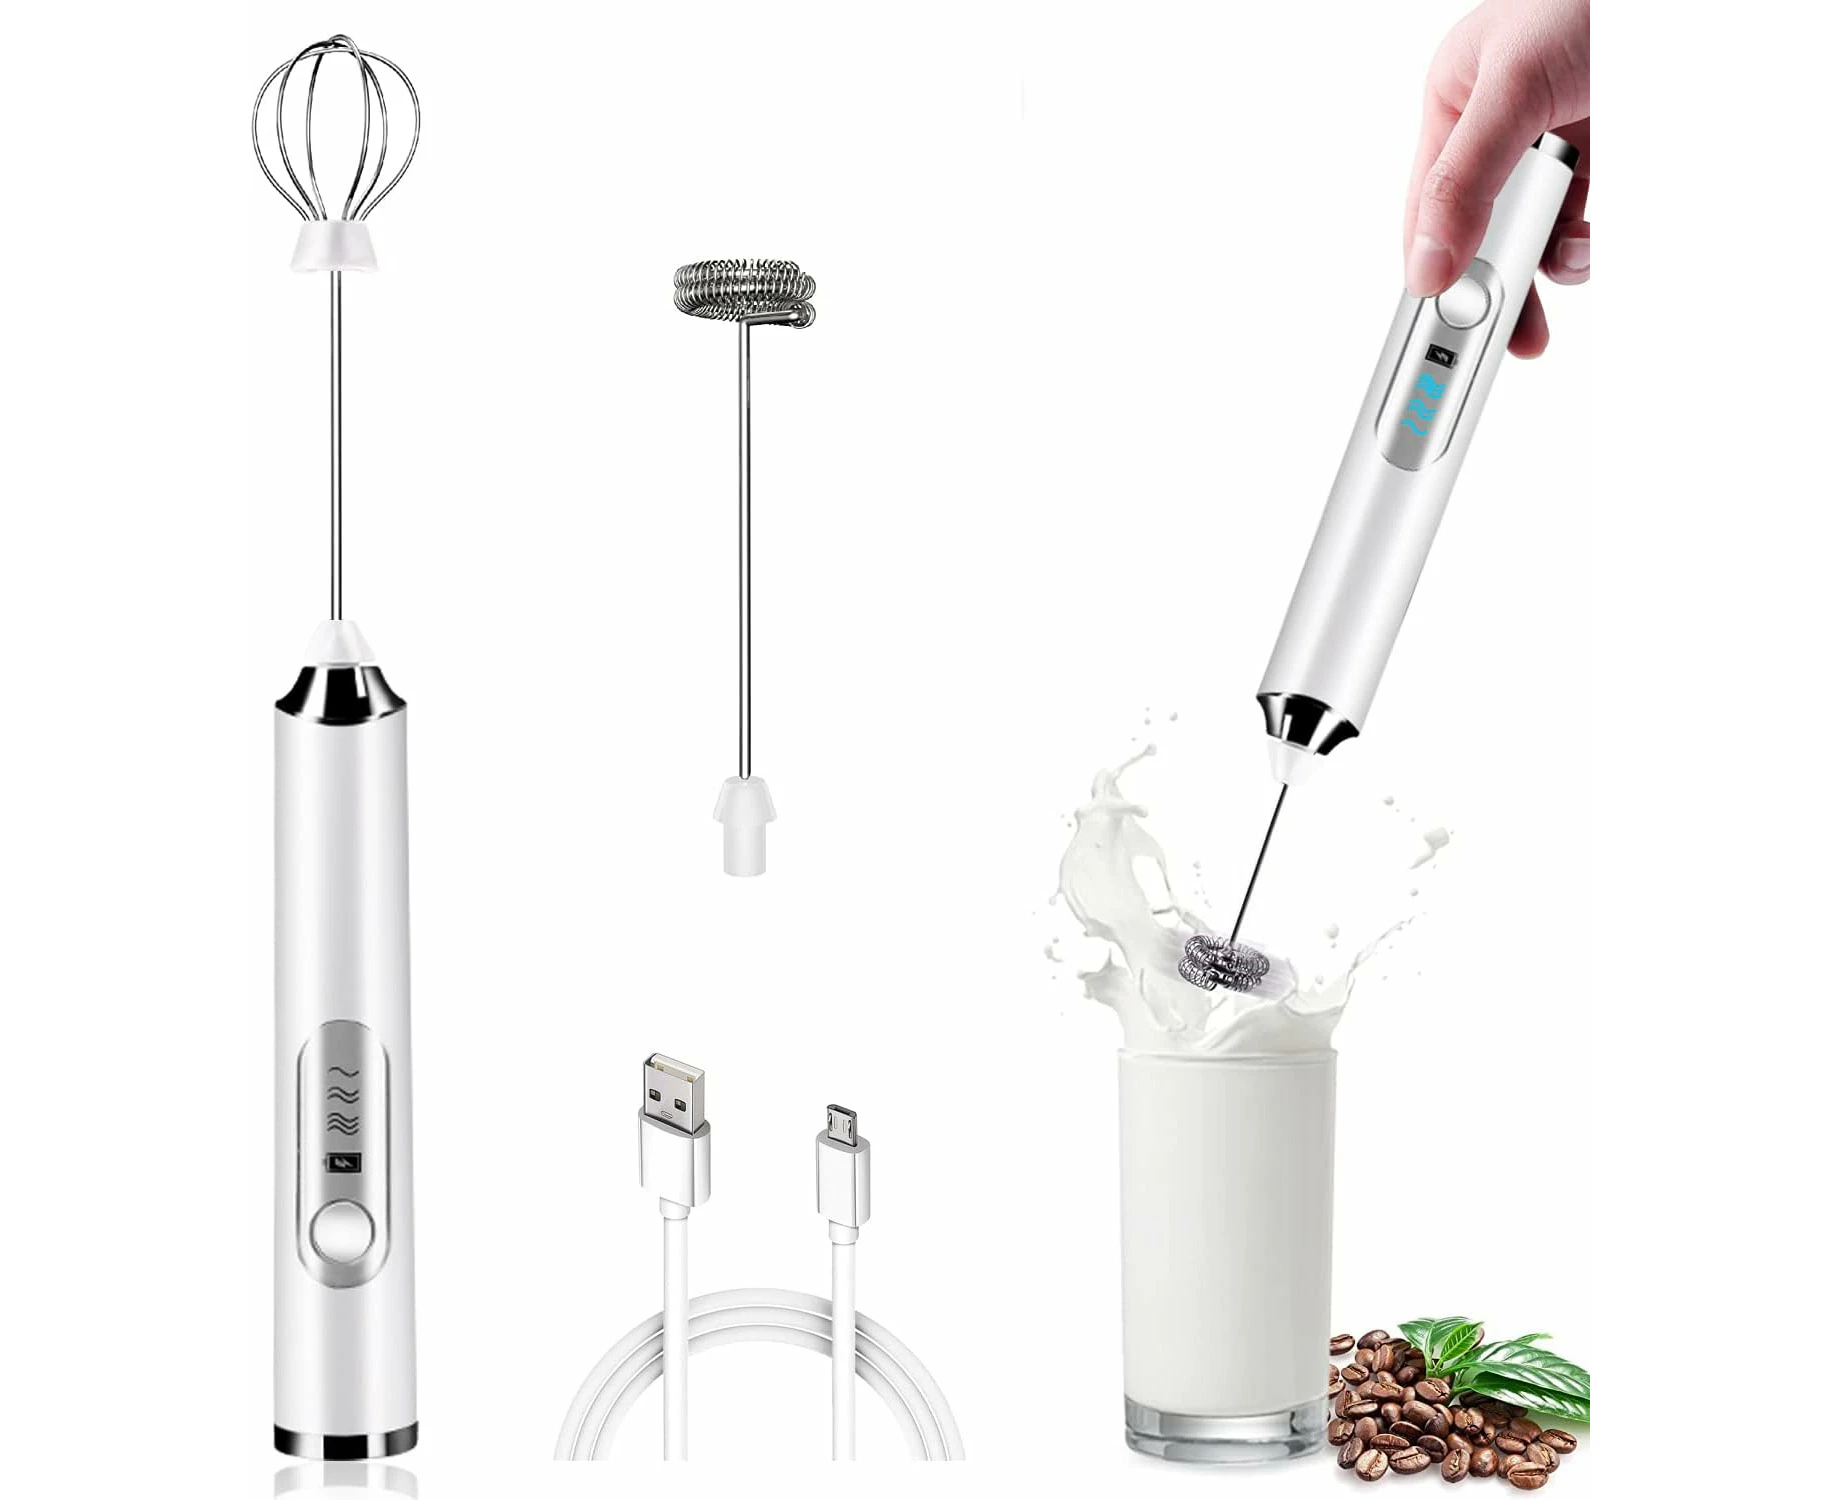 DELM Electric Milk Frother, Coffee Frother, Rechargeable, Drink Mixer,  Handheld